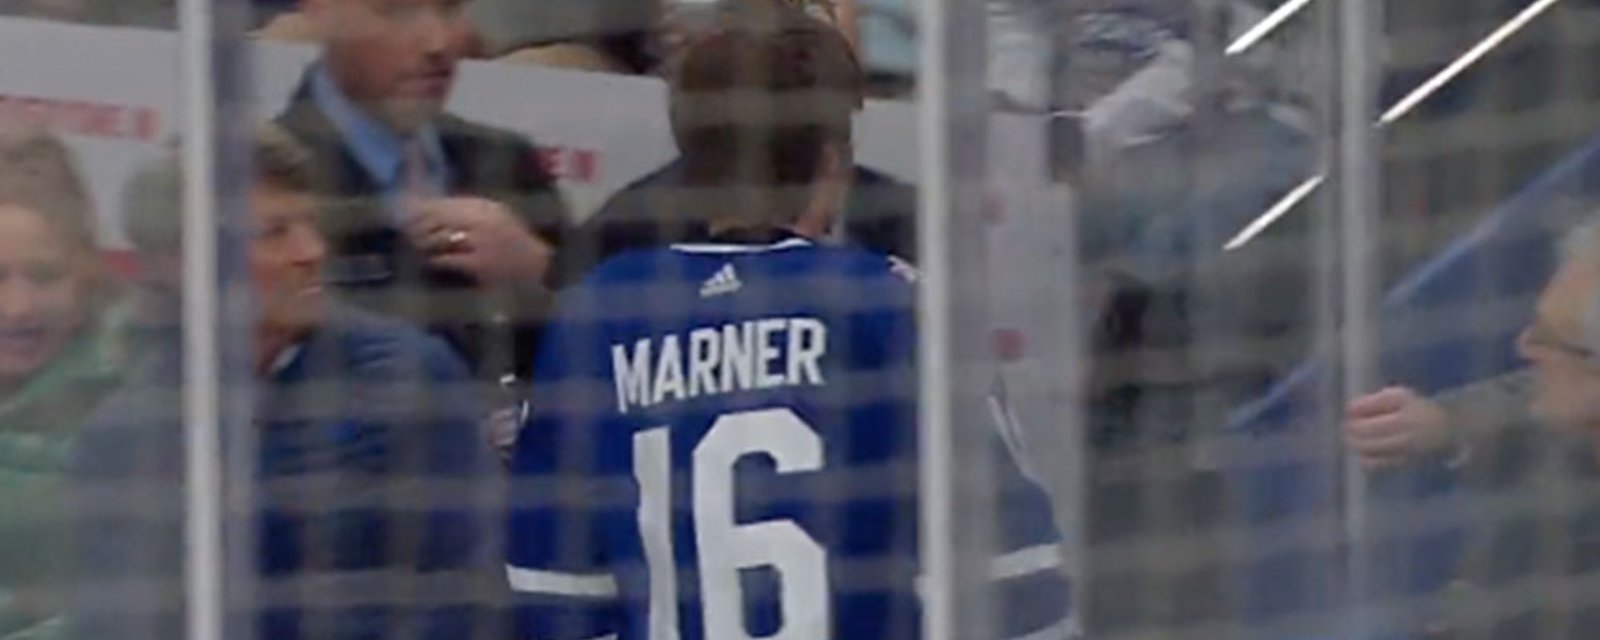 Scary moment after Mitch Marner takes a puck to the face